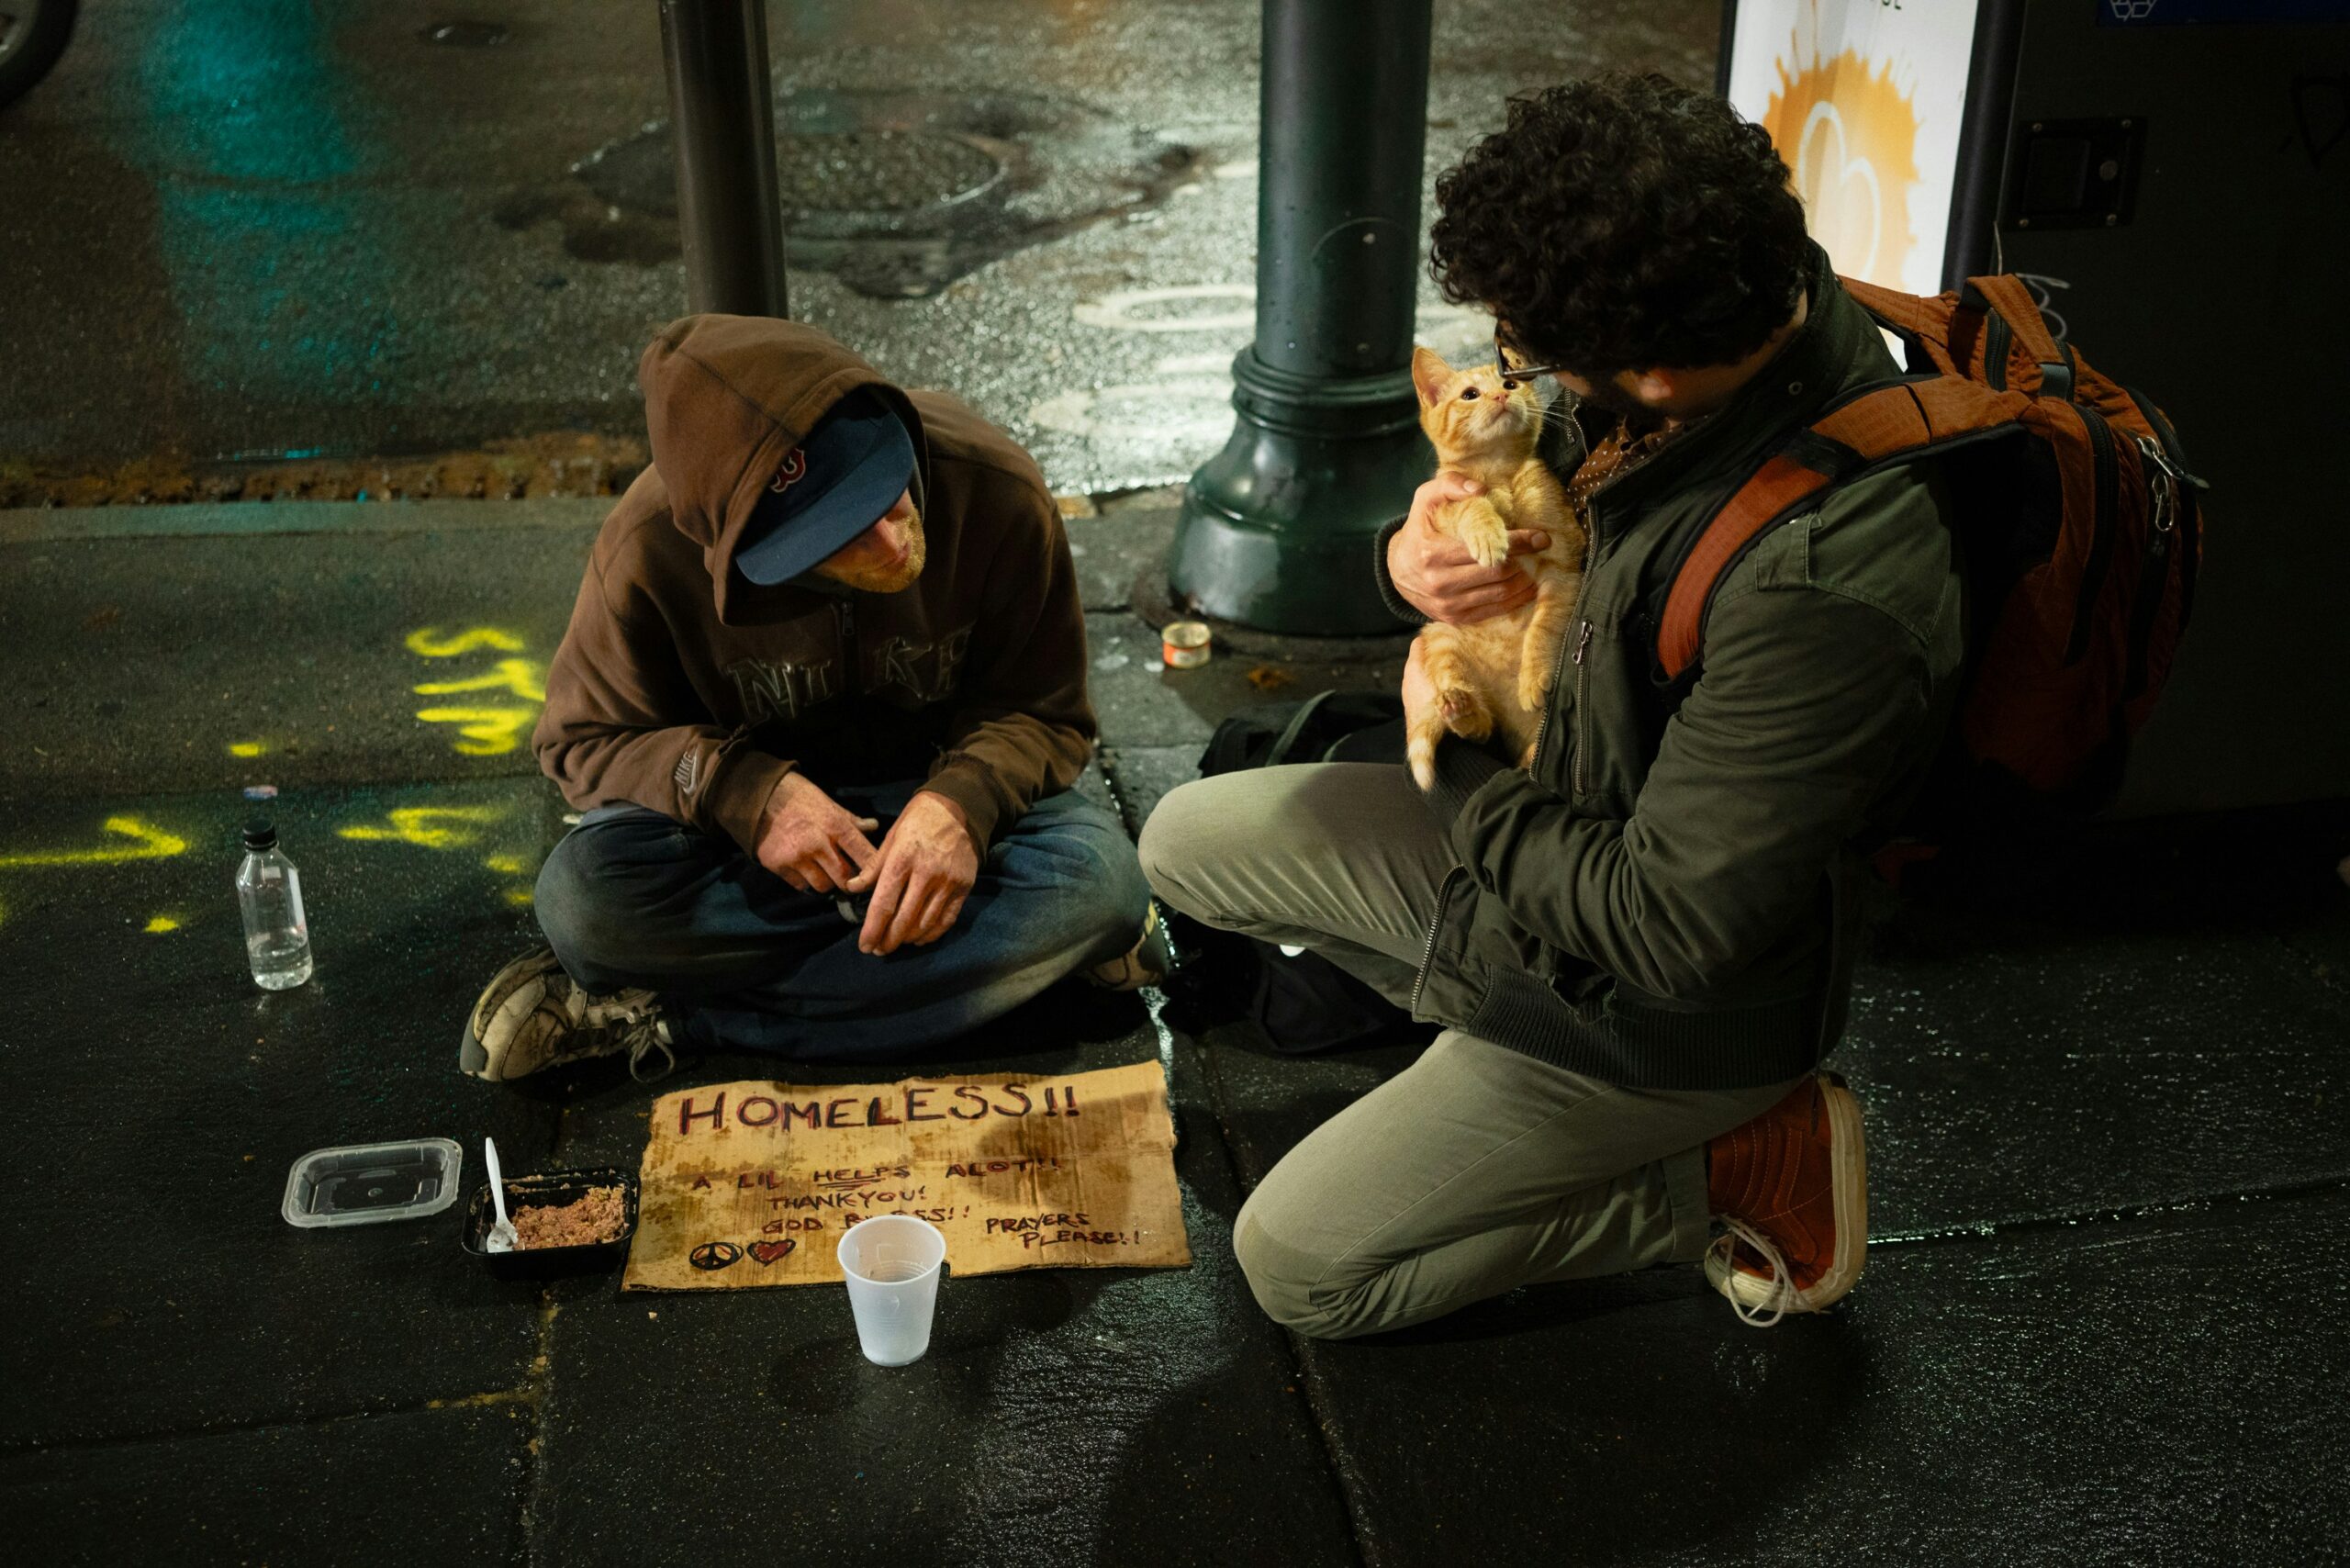 A person holding a cat is helping a beggar in the street